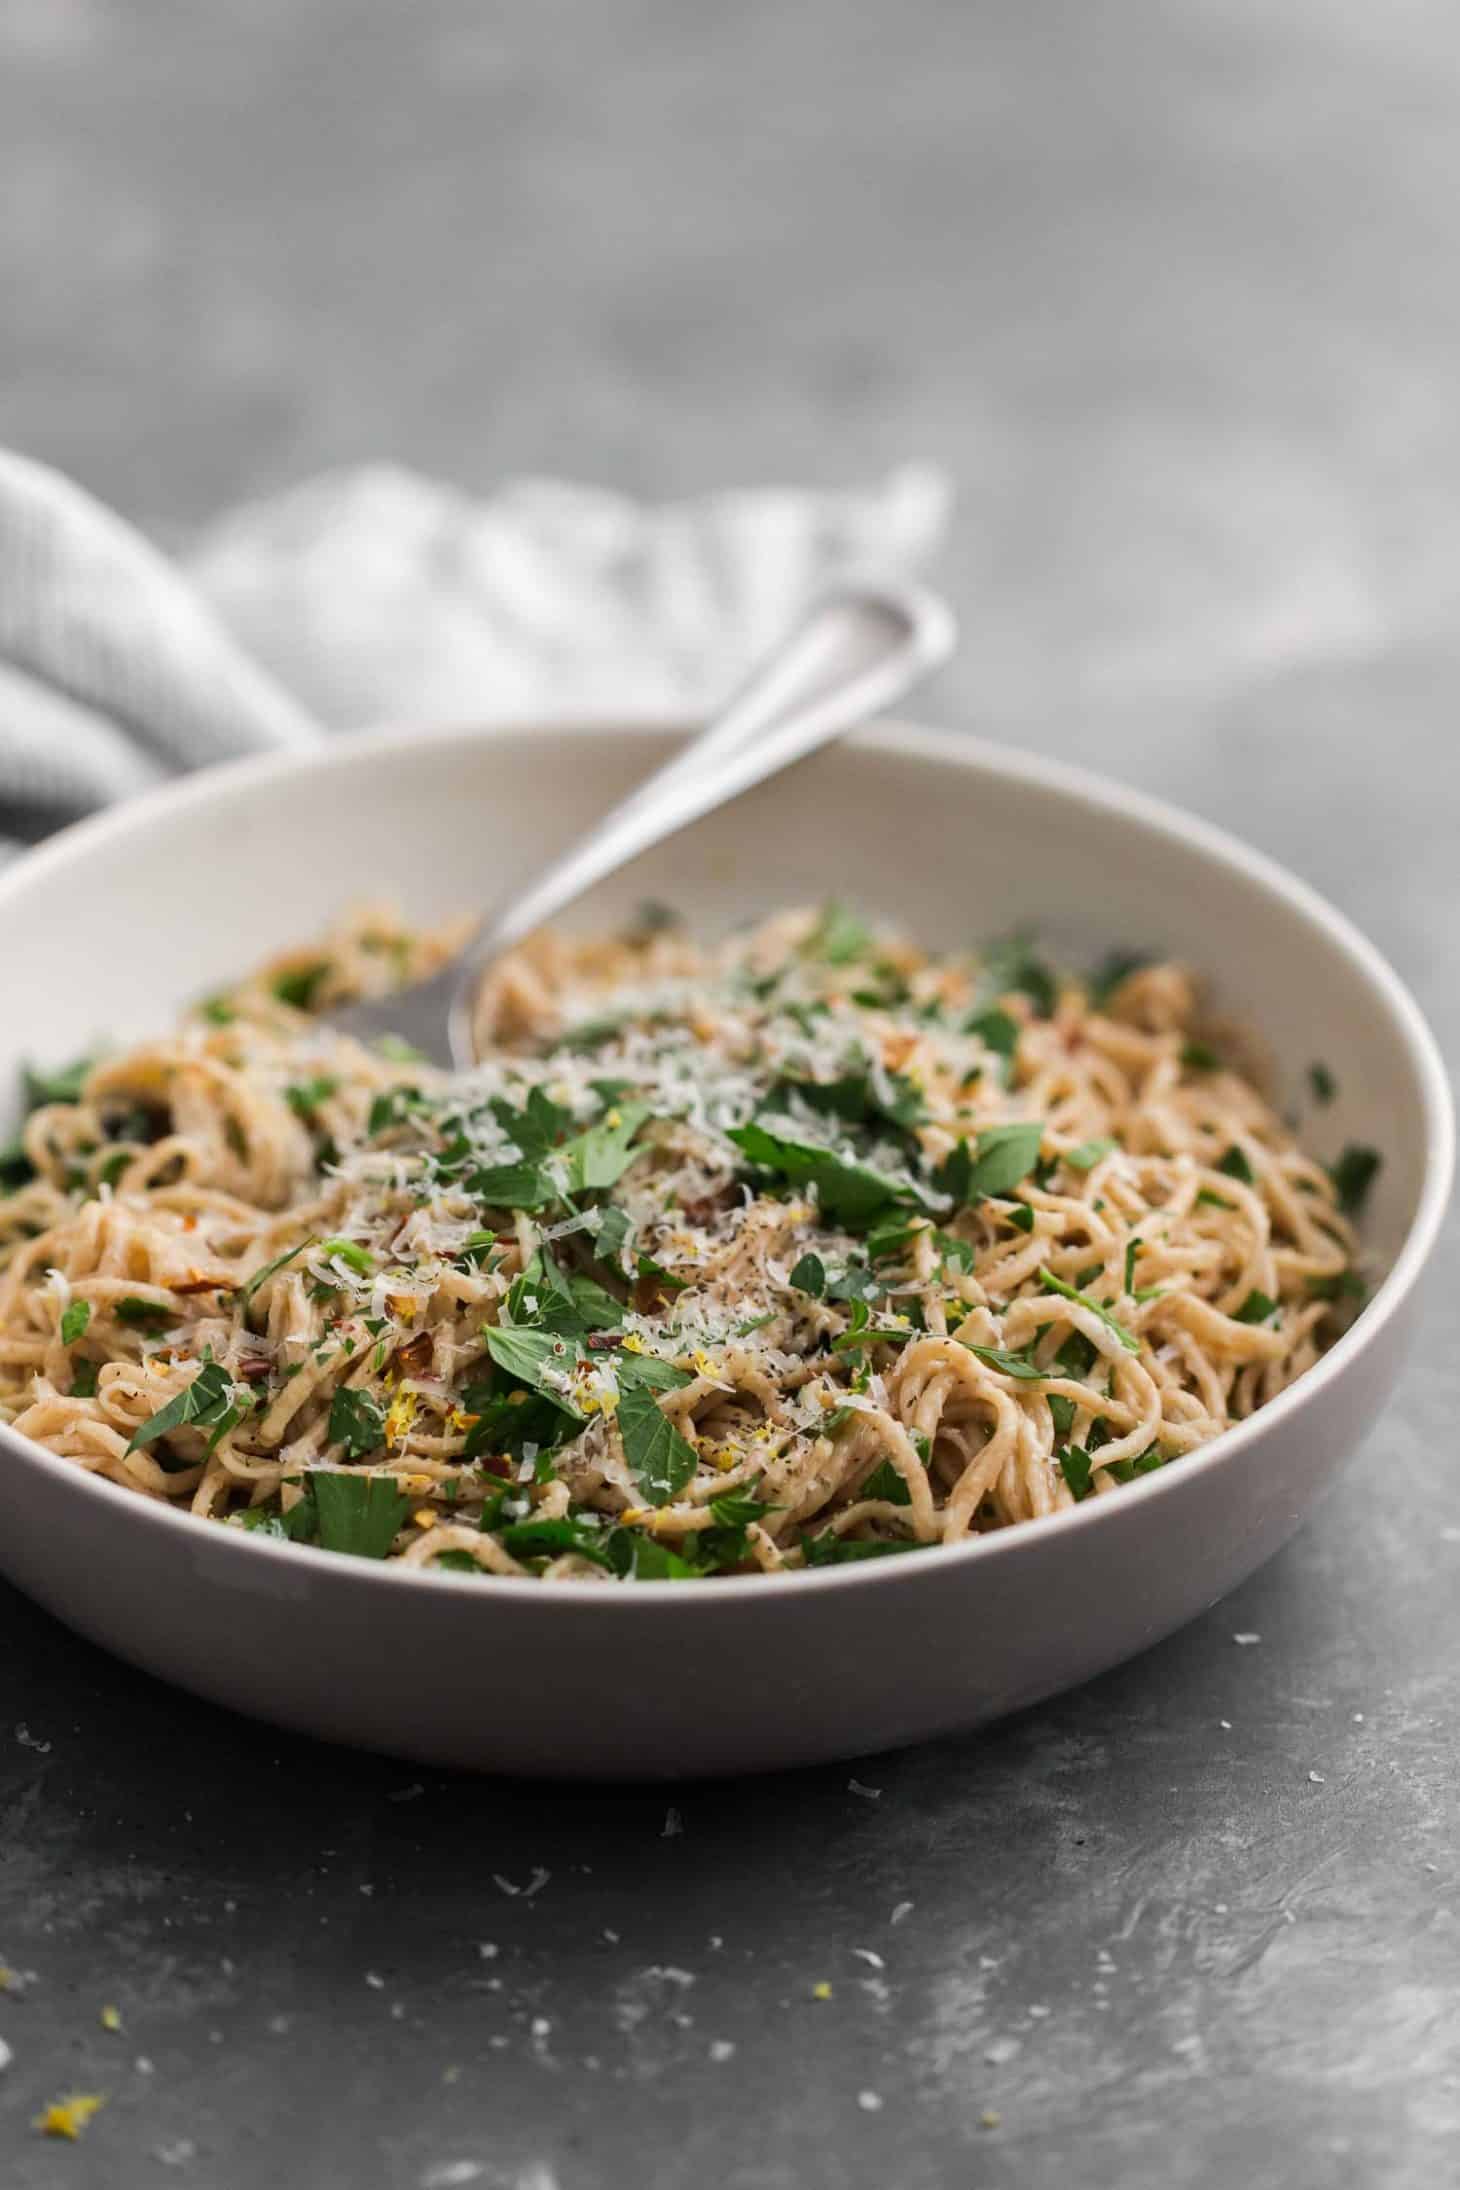 Spaghetti with Parsley and Garlic Oil from Eat this Poem